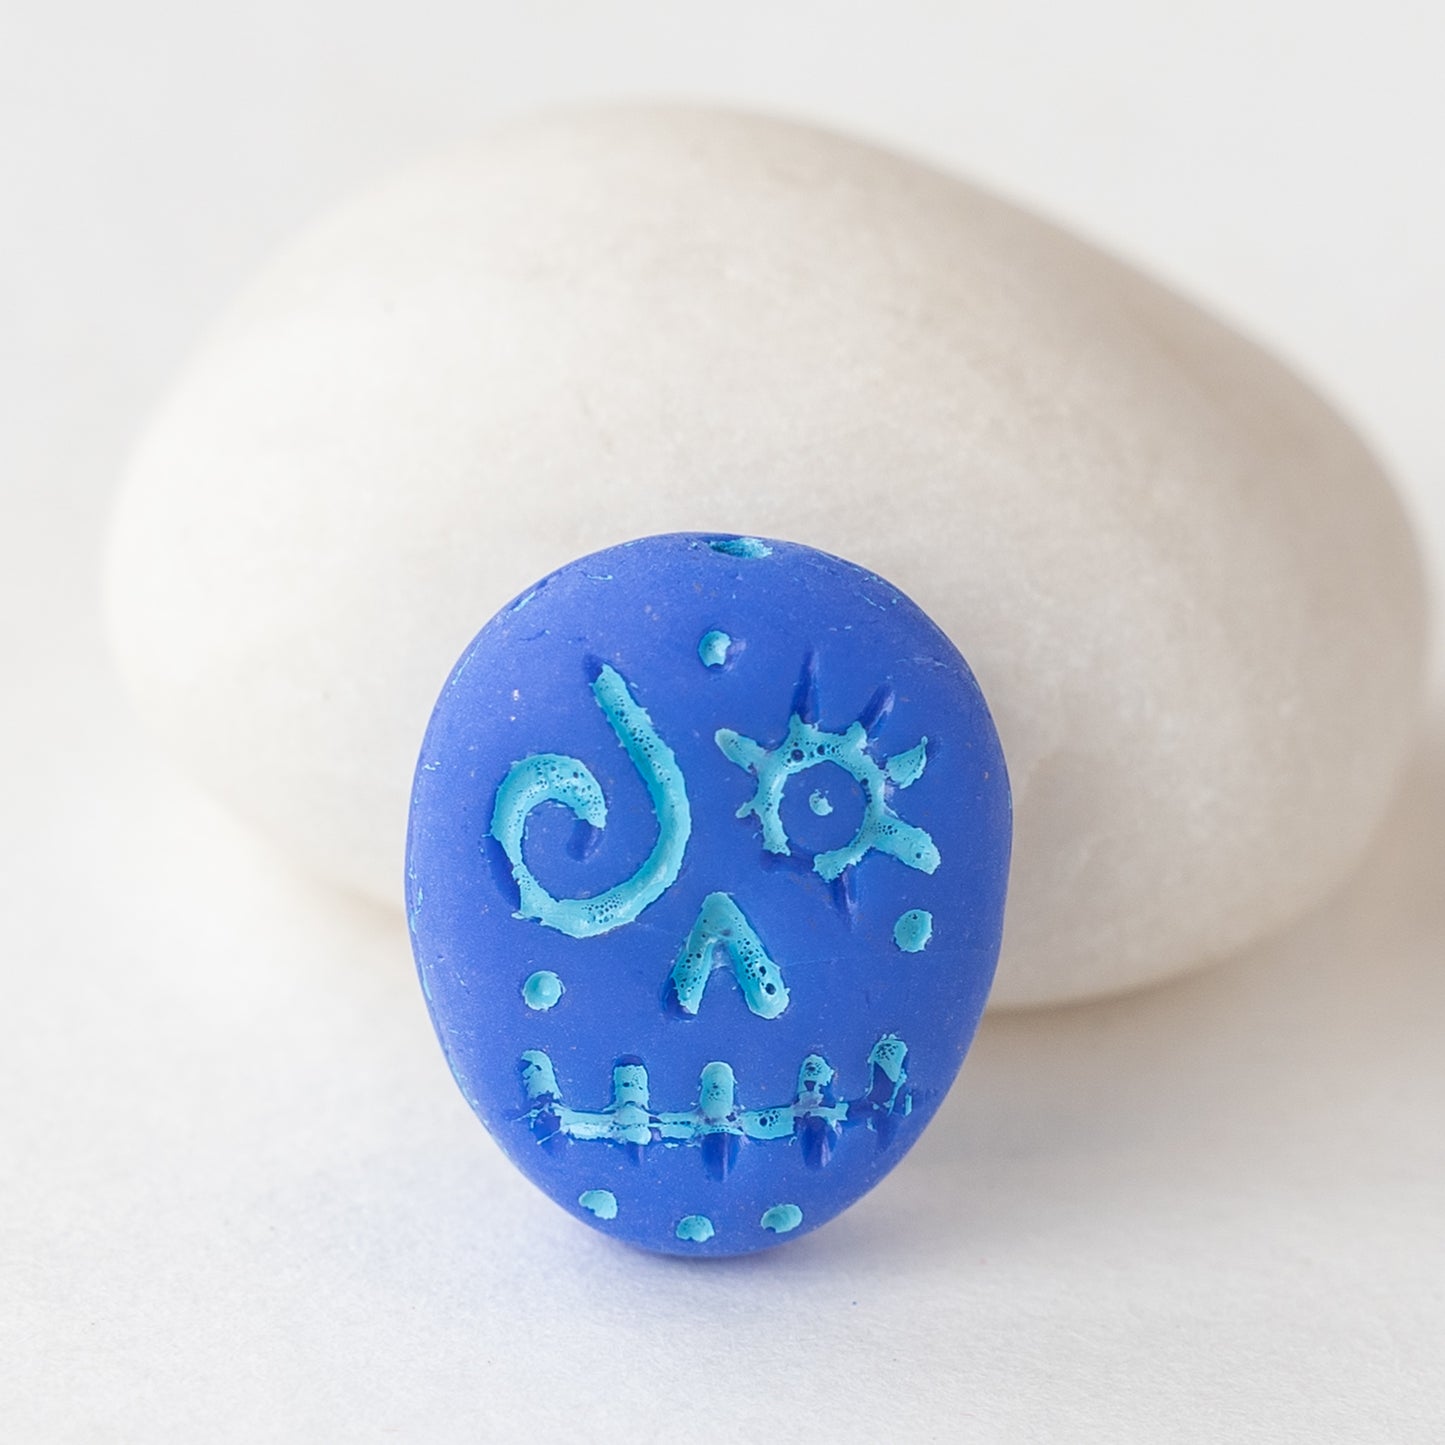 Funny Face Beads - Blue on Blue - 6 Beads